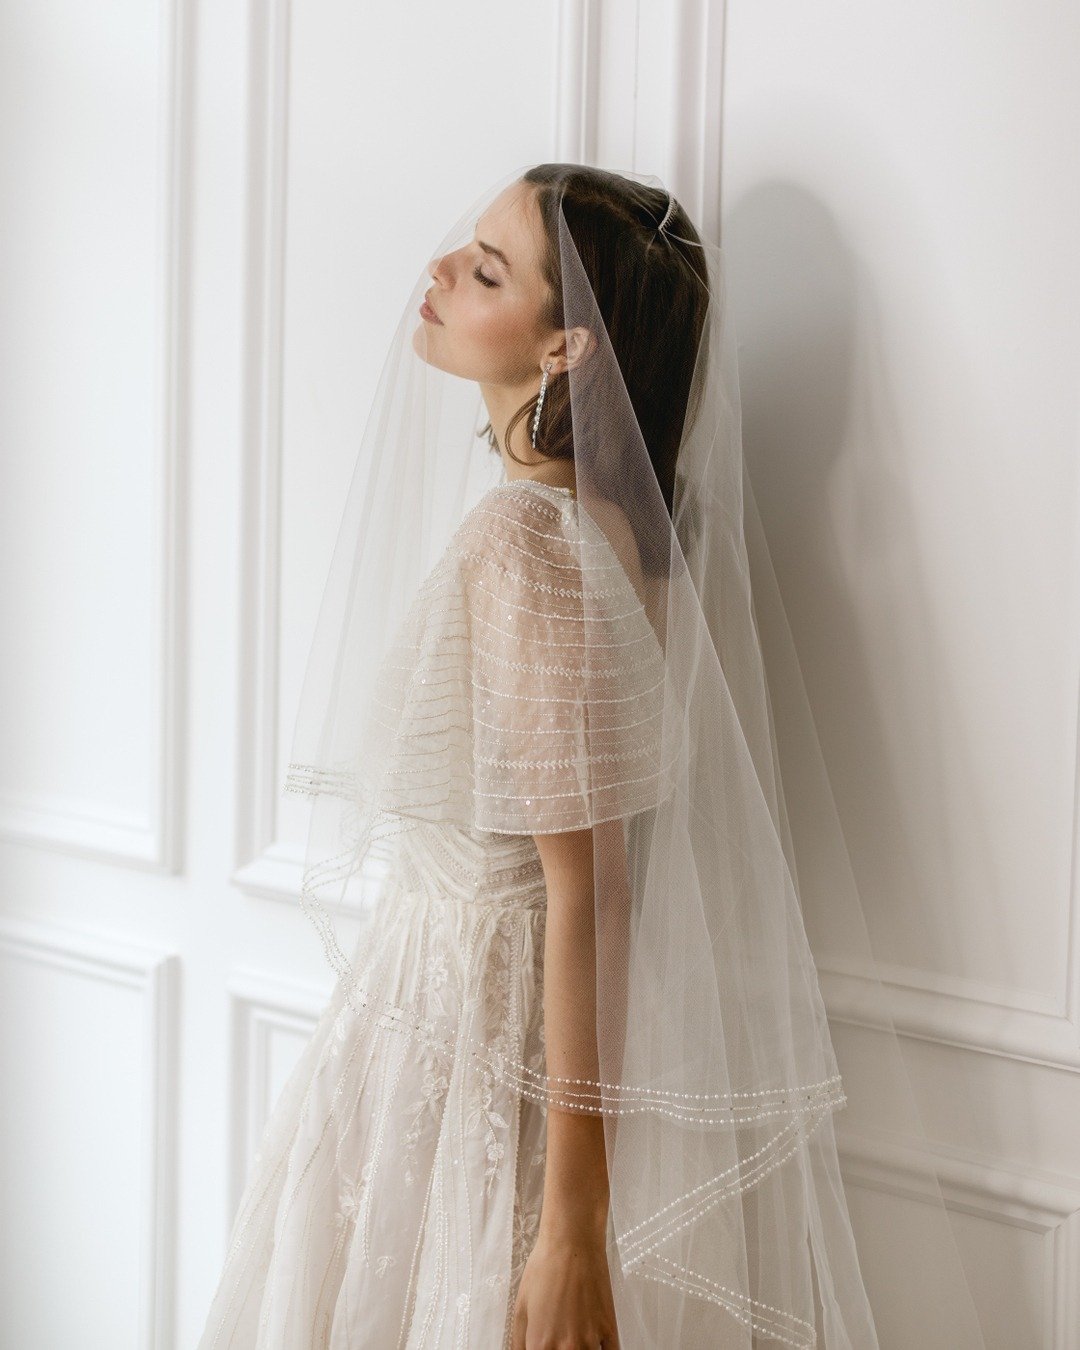 The 10 Best Places To Buy Veils and Accessories